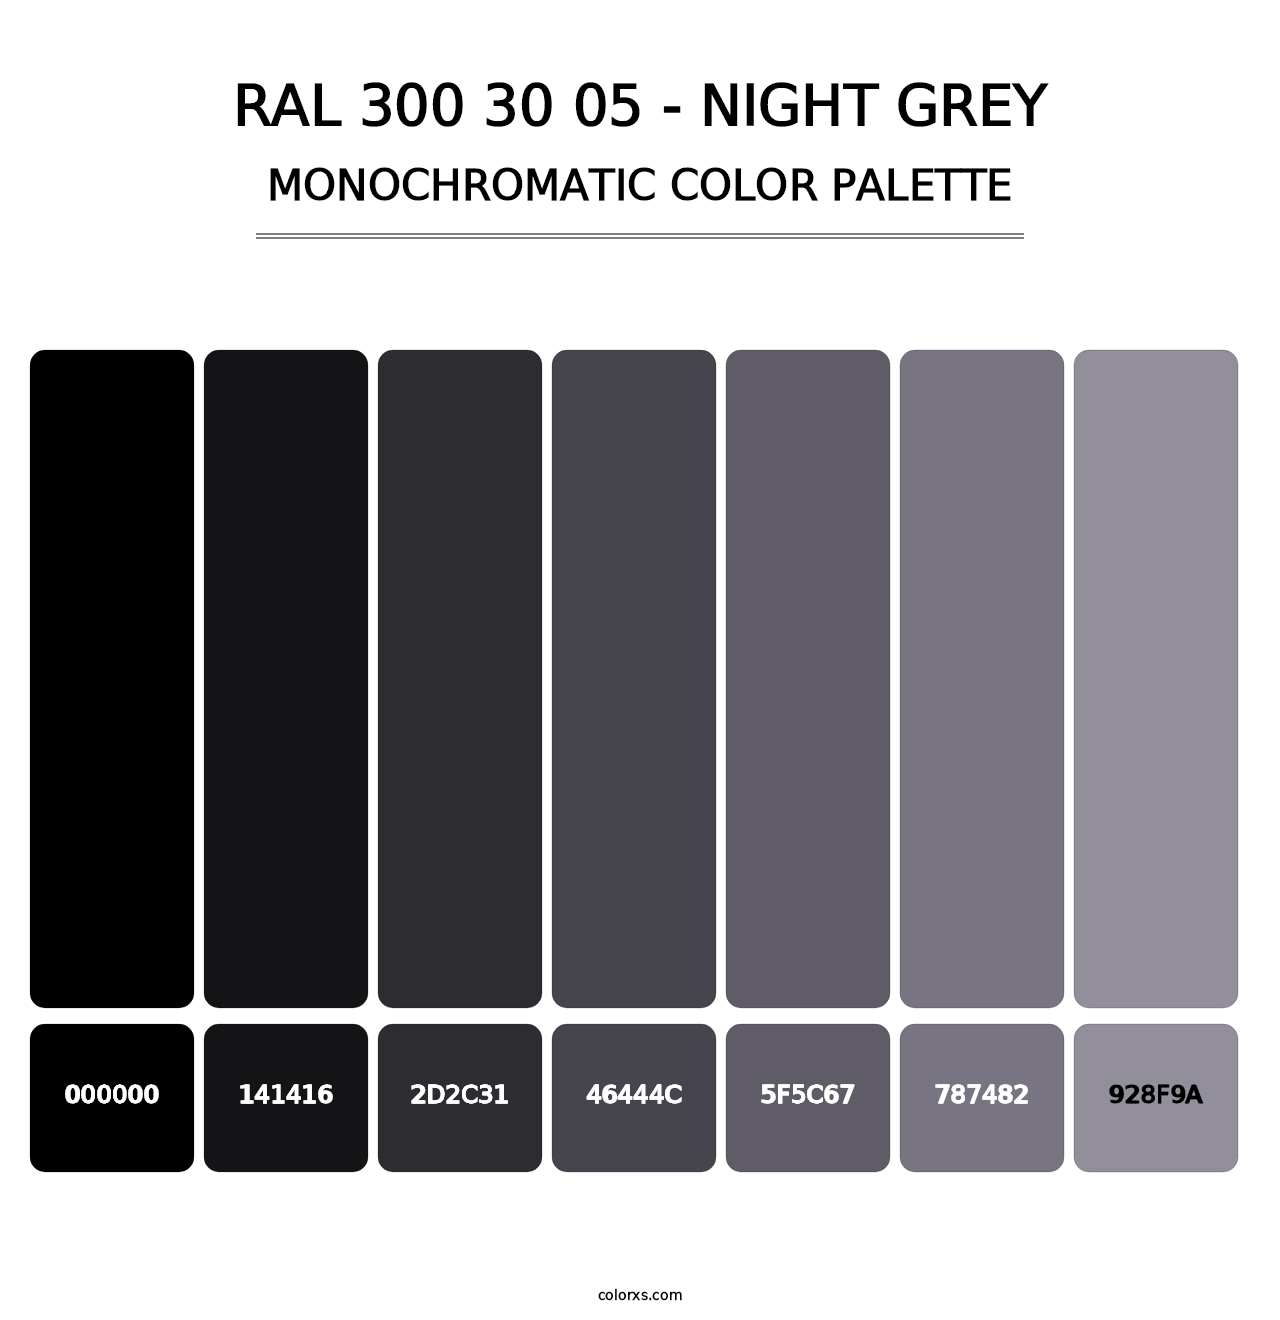 RAL 300 30 05 - Night Grey - Monochromatic Color Palette